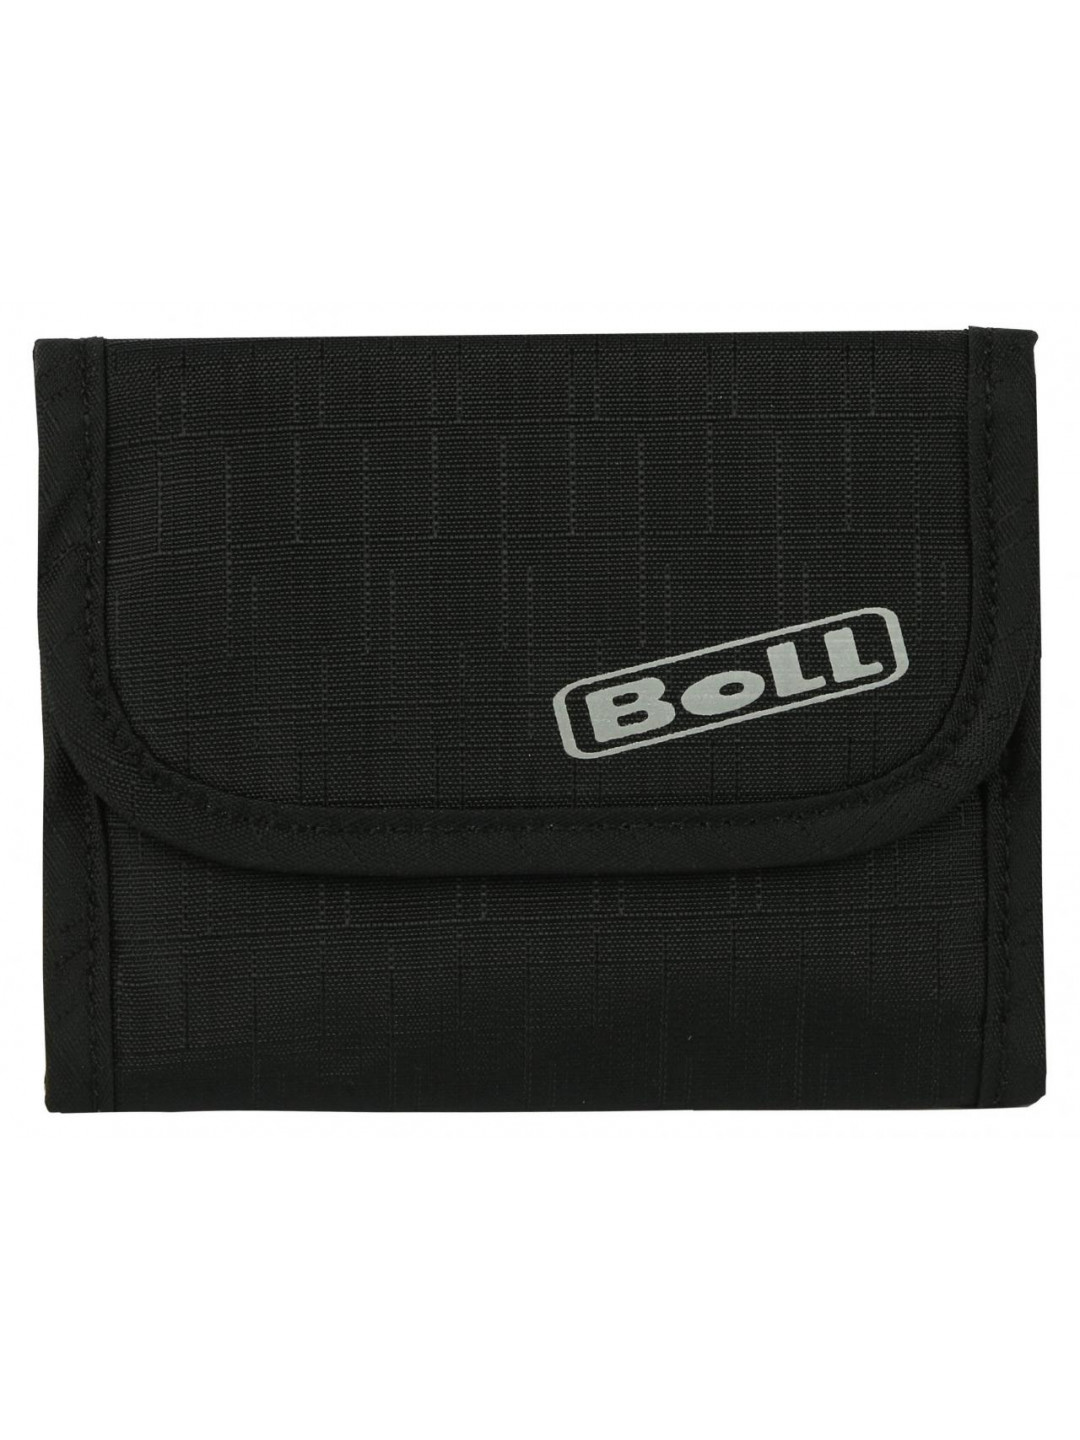 Boll Deluxe Wallet Black lime